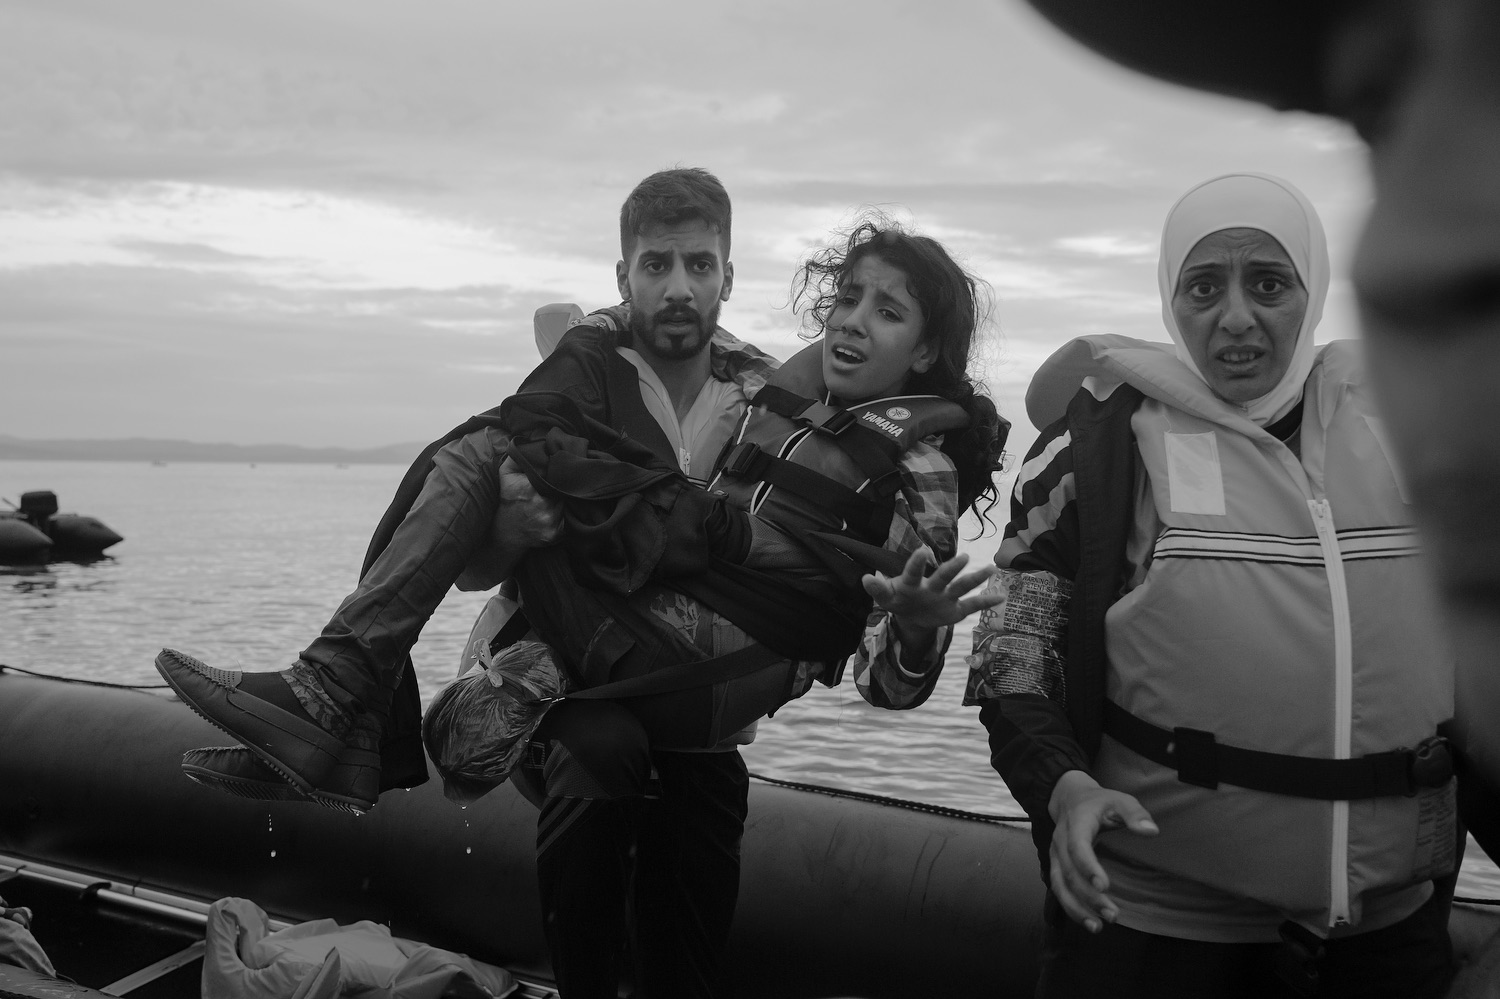 Refugees from Syria, Afghanistan, Pakistan, Somalia cross the sea between Turkey and Greece by means of inflatable pontoon rafts to the island of Lesbos as the first step in making their way across Europe.by James Nachtwey